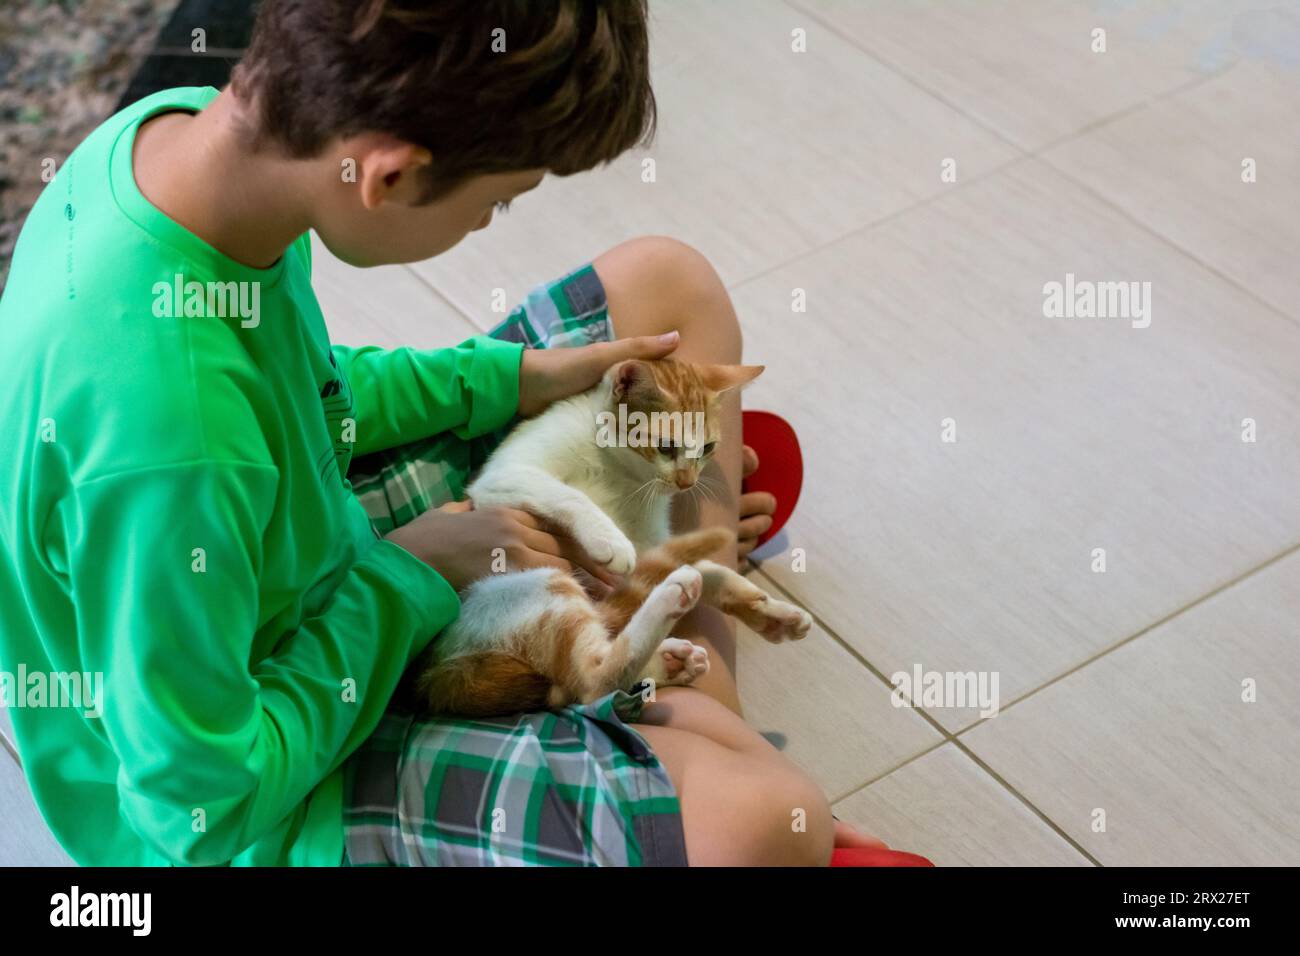 A boy holding his cat affectionately. inseparable companion. Domestic animal. Stock Photo